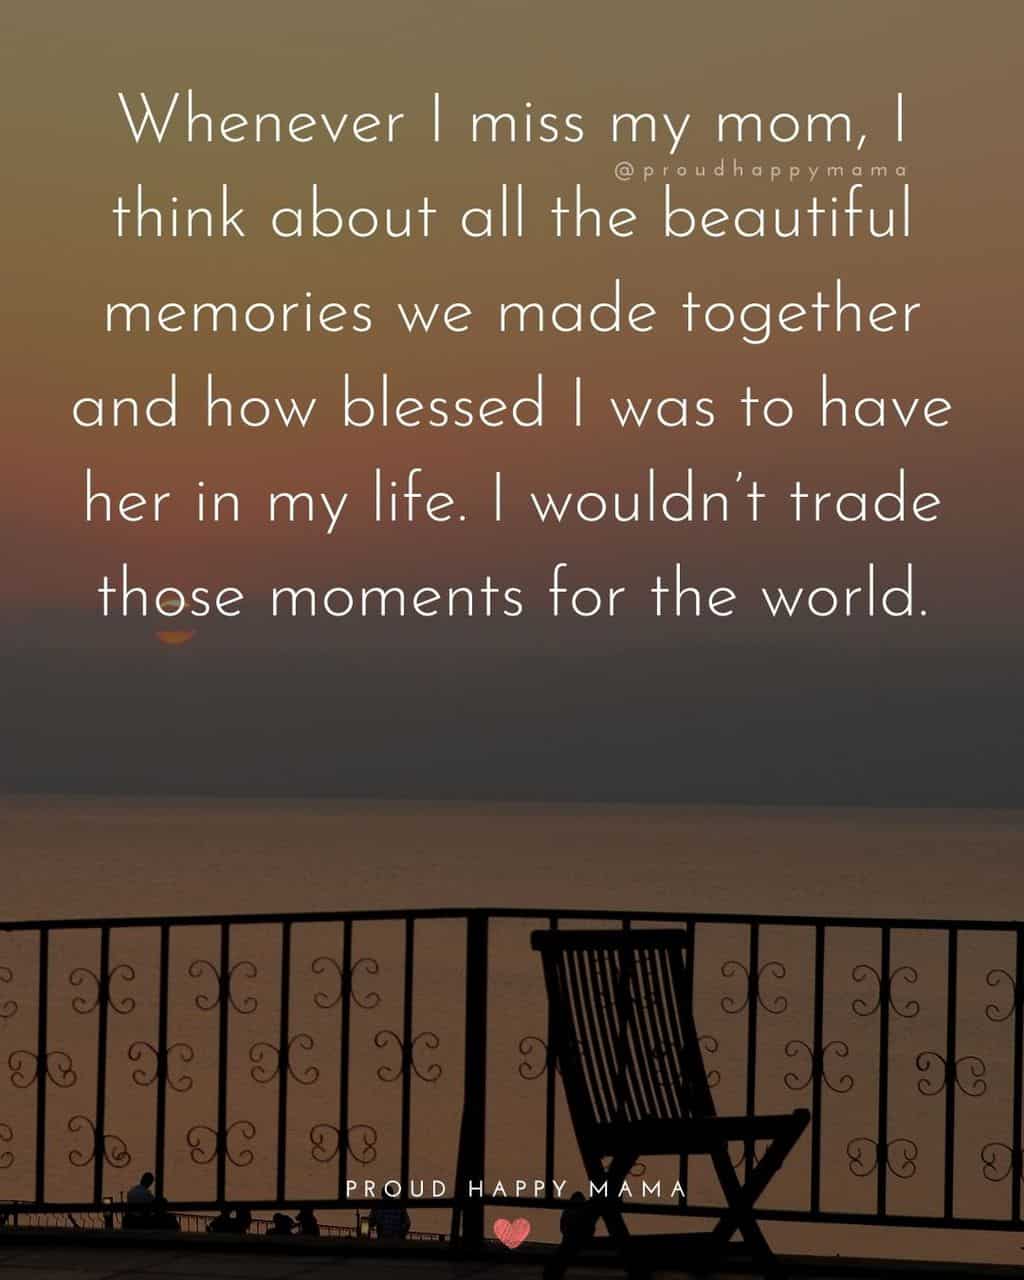 Empty chair on balcony with lake in the background. With I miss my mom who passed away text overlay. 'Whenever I miss my mom, I think about all the beautiful memories we made together and how blessed I was to have her in my life. I wouldn’t trade those moments for the world.'